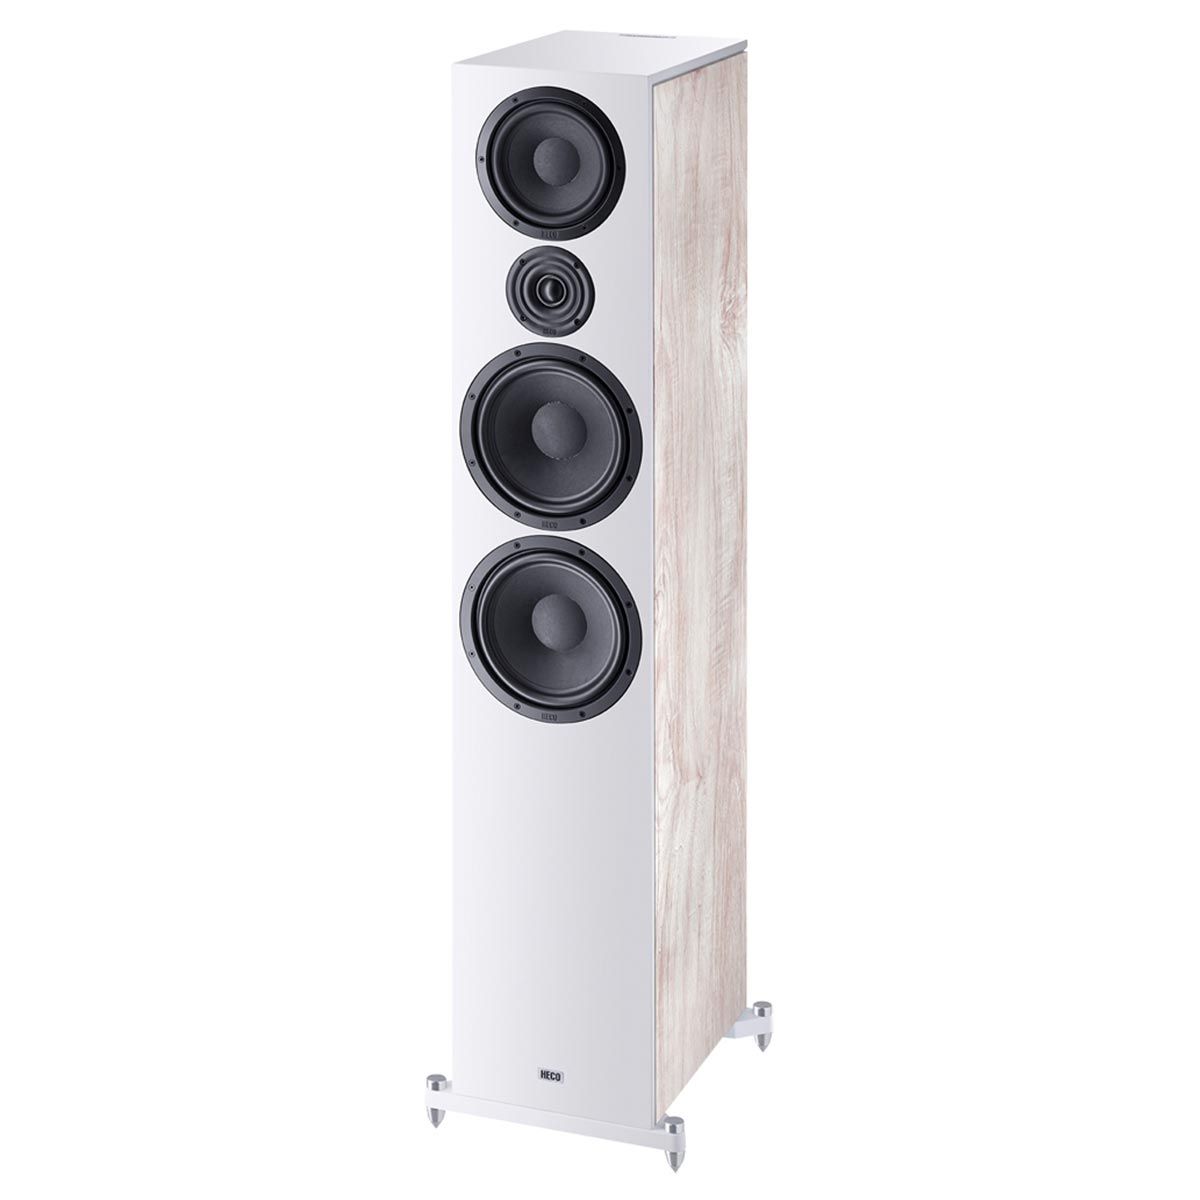 HECO Aurora 1000 3 Way Dual 8 Floorstanding Speaker in Black with Fluctus Tweeter with 28 mm Fabric Dome and Computer-Optimized Front Panel for Perfect Dispersion 